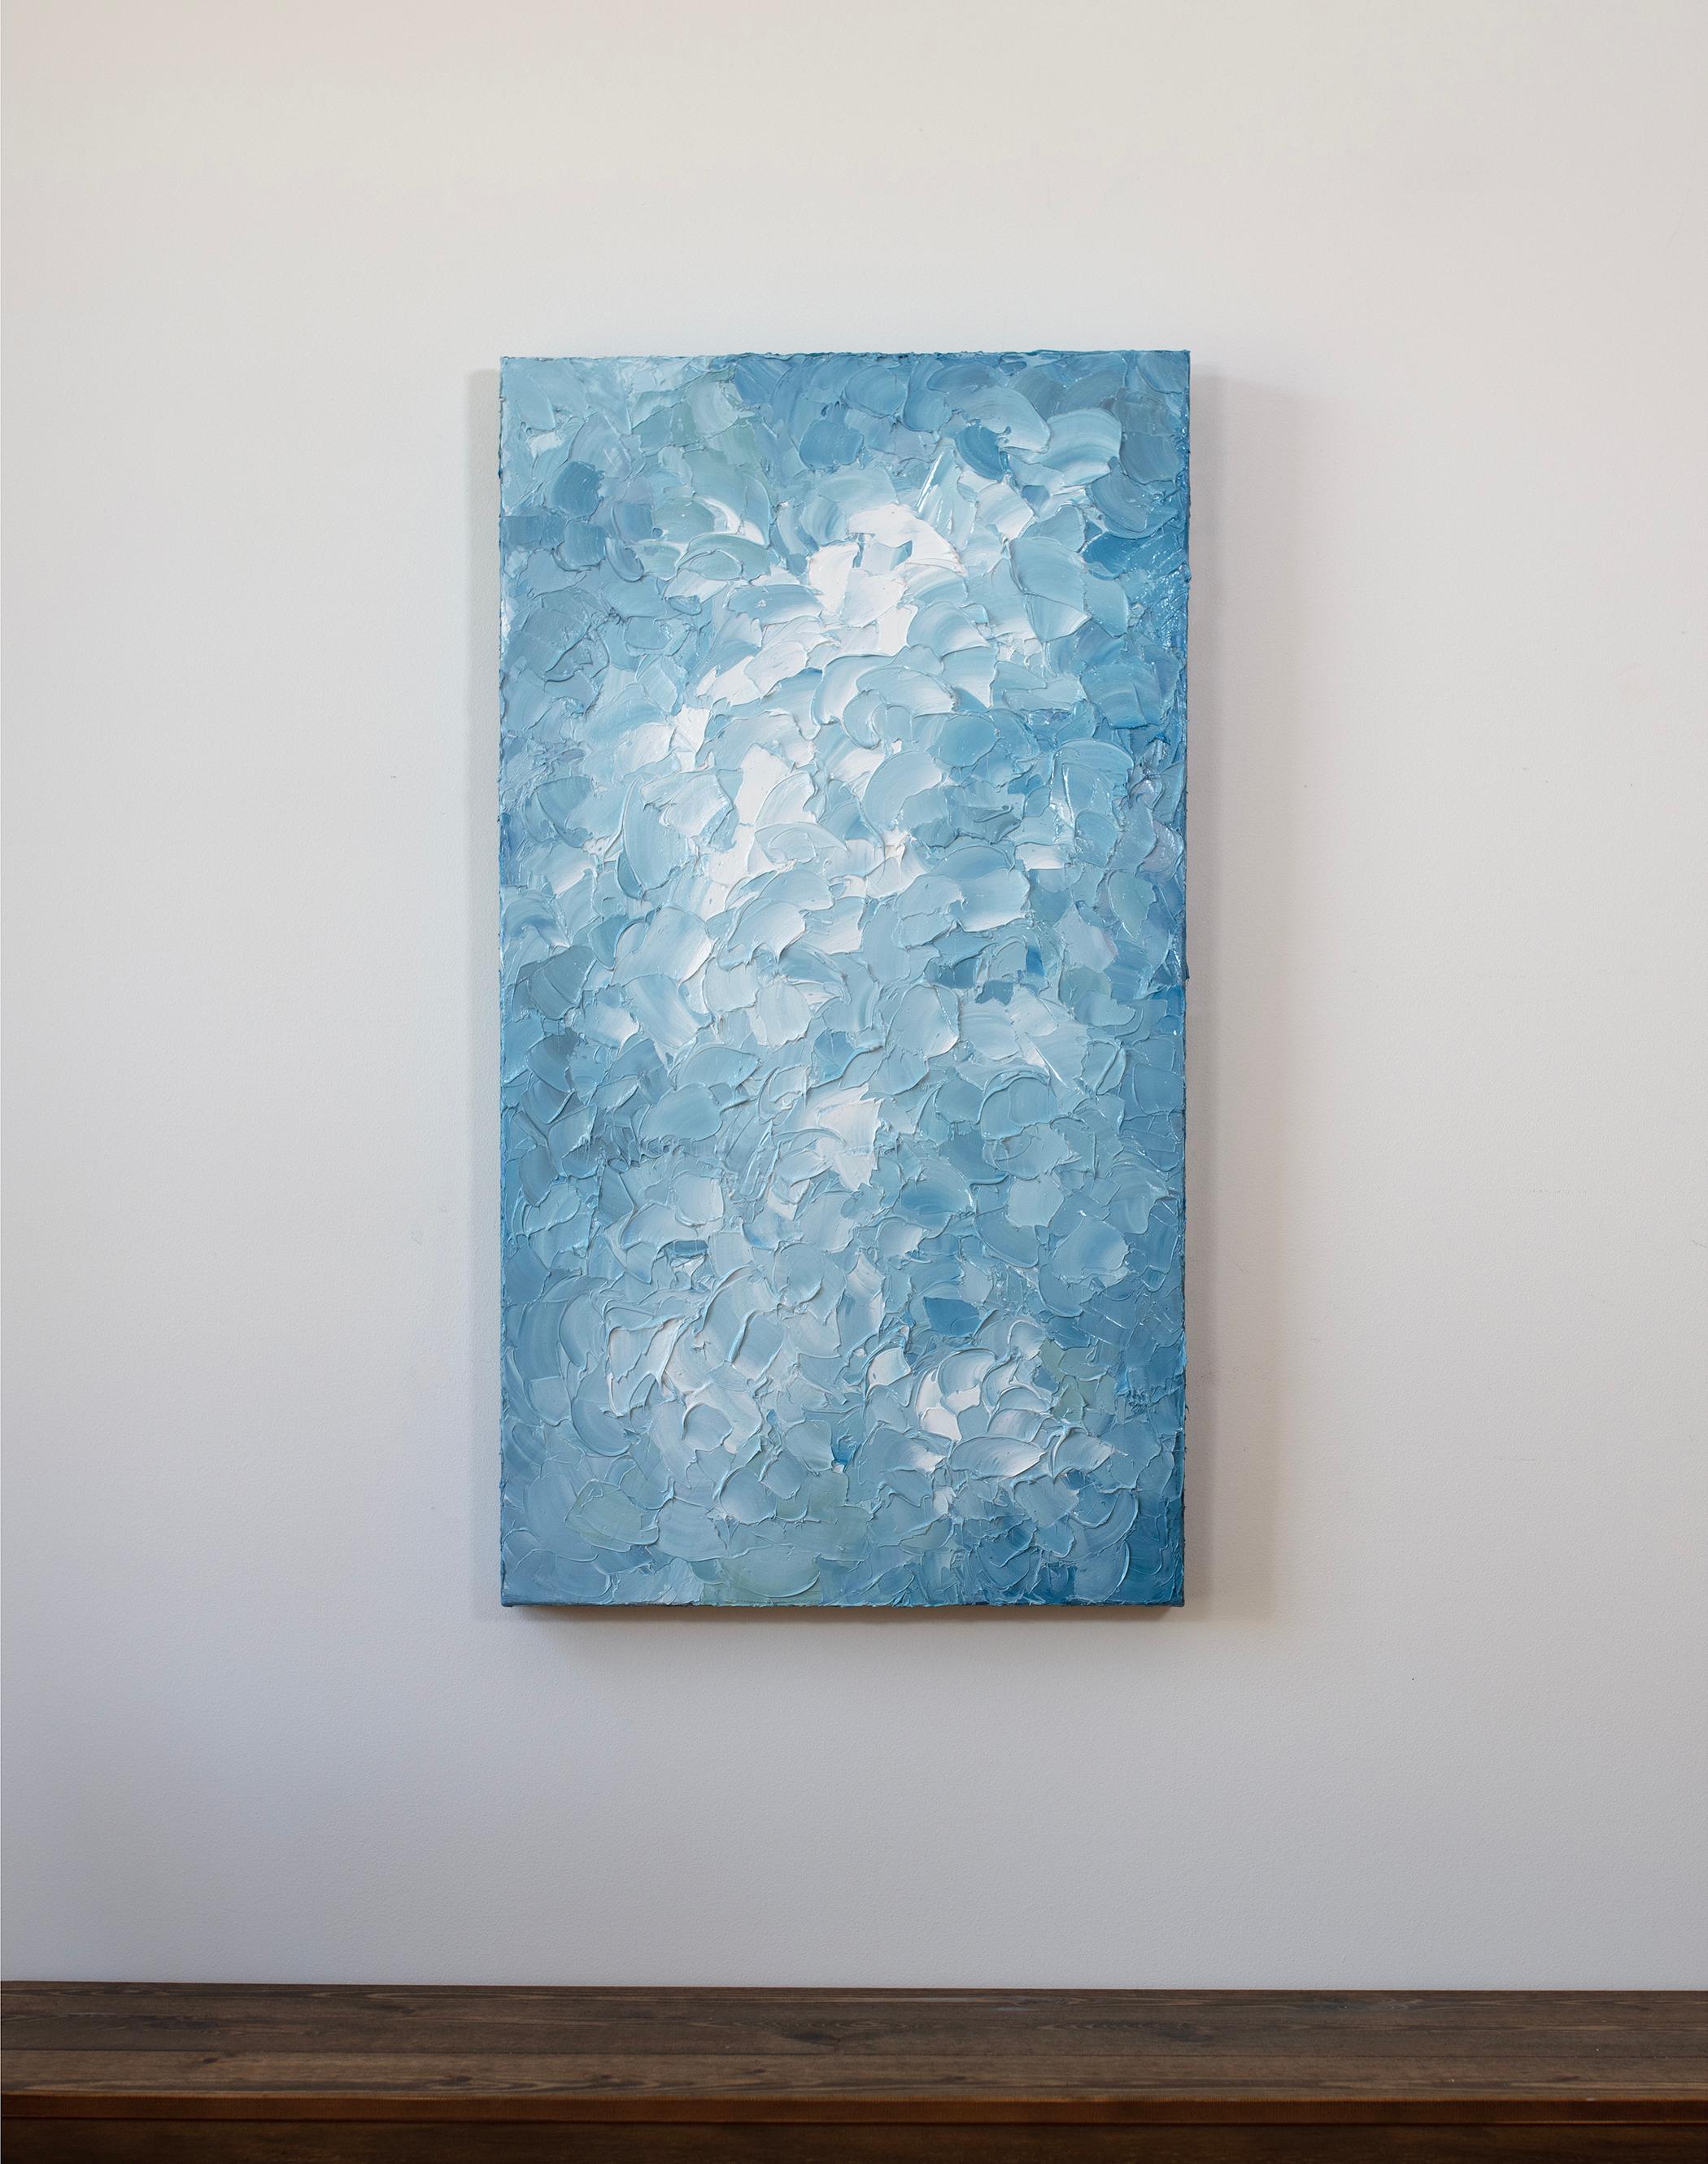 This textured abstract painting by Teodora Guererra features a light blue and white palette. The artist applies thick layers of paint in short, sweeping gestures - a process she likens to frosting a cake. The painting is made with oil paint on